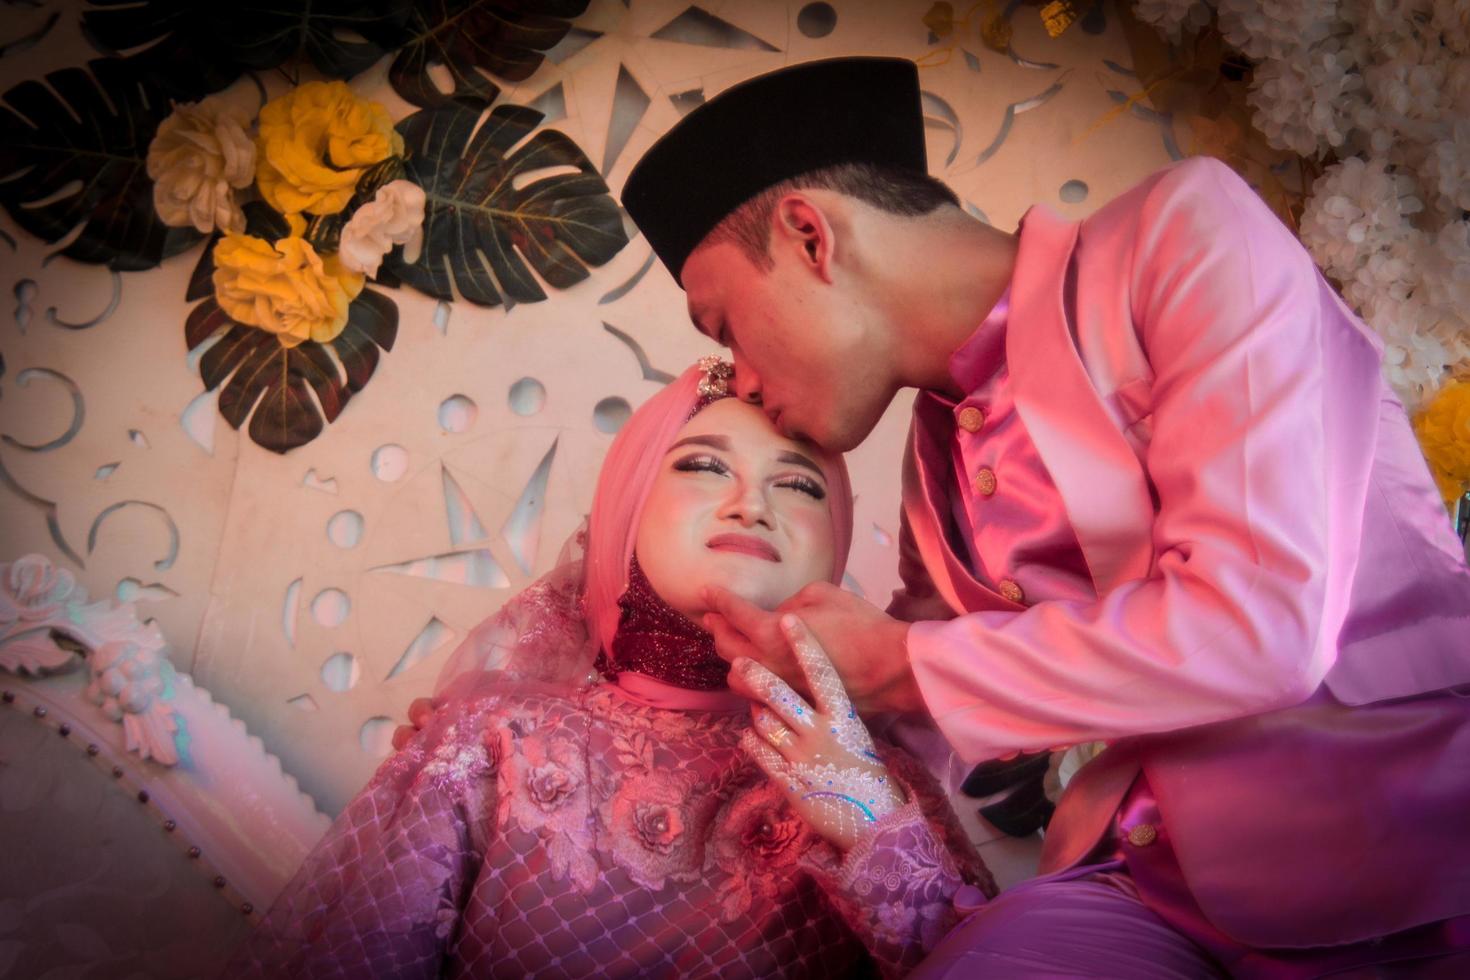 Cianjur Regency, West Java, Indonesia on June 12, 2021, A pair of lovers stare at each other about to kiss. photo